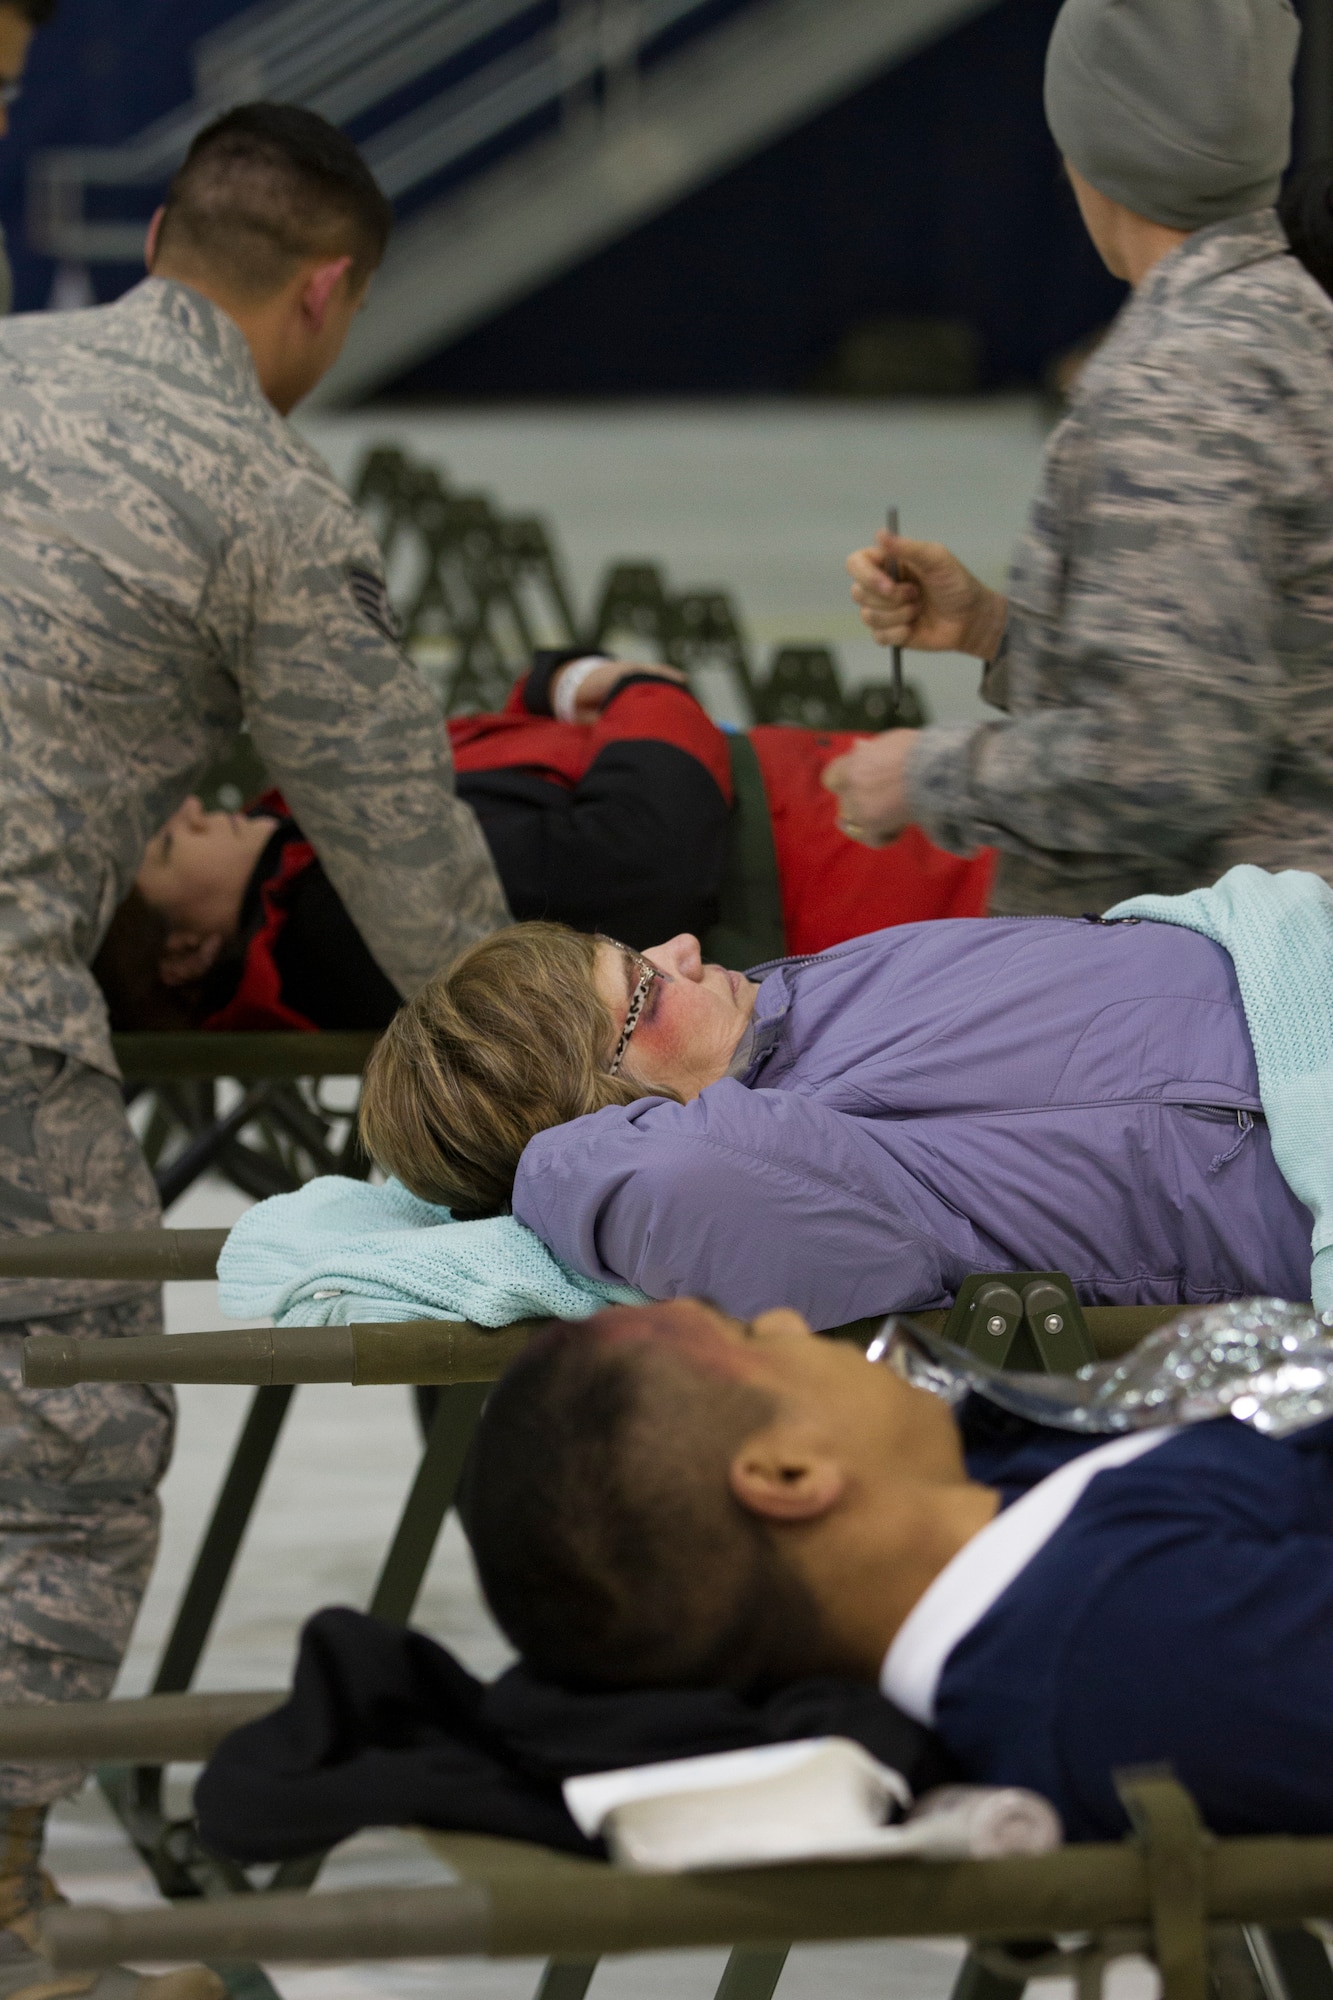 Simulated trauma victims are treated at the Disaster Aeromedical Staging Facility and evacuated by members of the Air Force as part of Alaska Shield 14 here, March 31, 2014.  The role players originated in Kodiak, Alaska, to exercise patient triage and movement procedures there before being flown to Anchorage for further processing. Alaska Shield 14 is an exercise that involves state, federal, military and local agencies, designed to test the response and coordination of the disaster modeled after the 1964 earthquake and subsequent tsunami that devastated much of South Centeral Alaska. (U.S. Army photo by Sgt. Shane Dorschner)